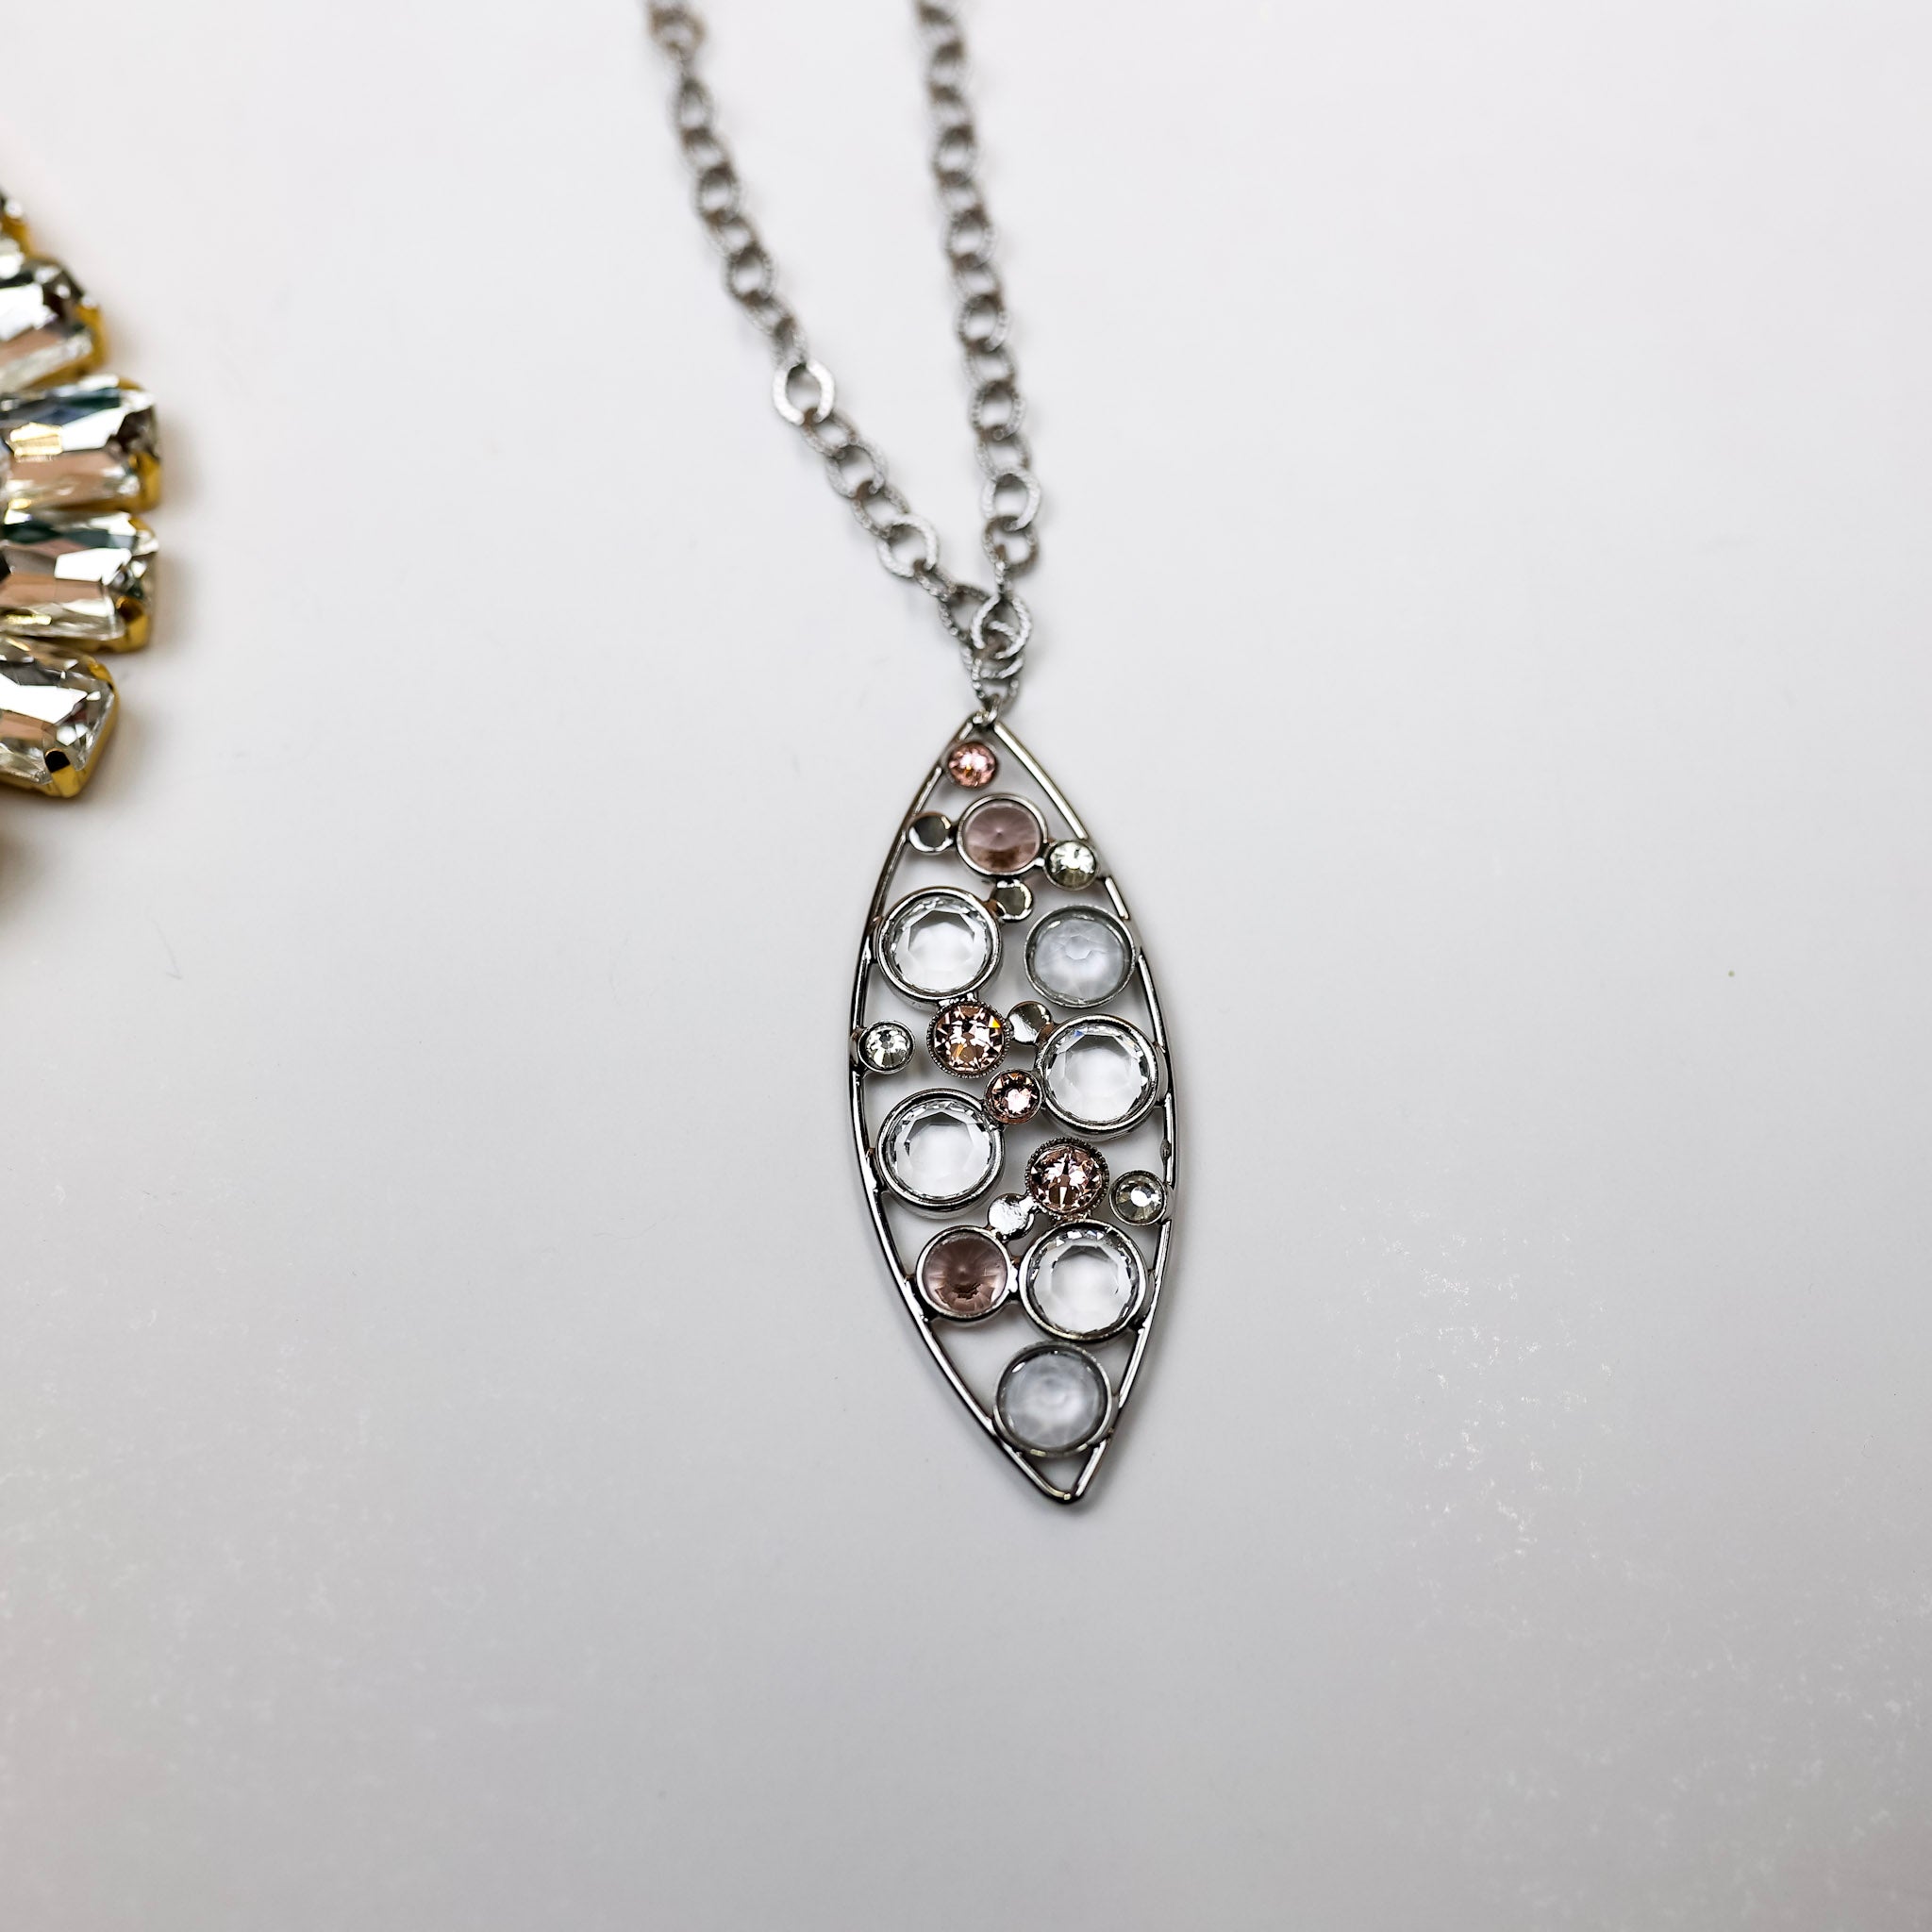 A long silver-tone necklace with an oval outline pendant and crystals. Pictured on a white background.